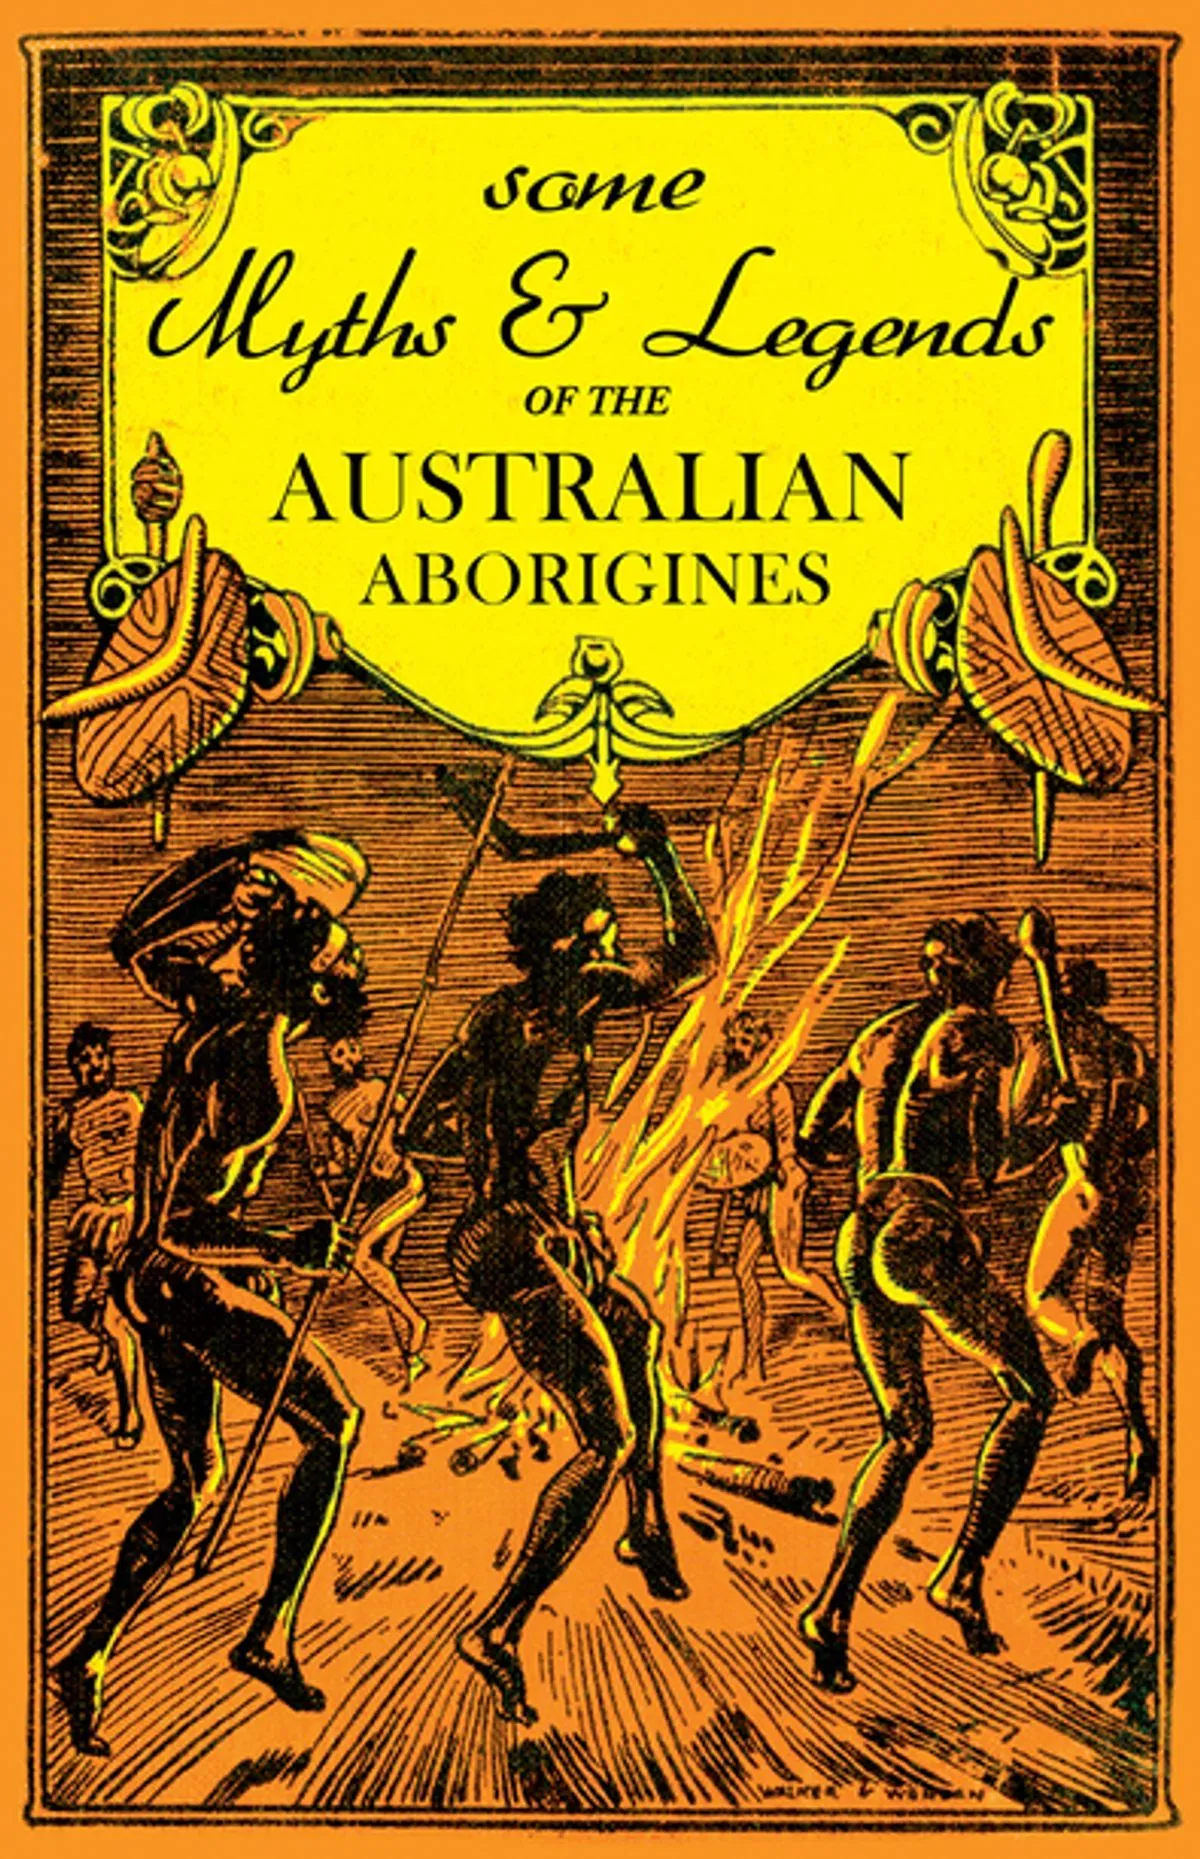 W.J. Thomas, Some Myths and Legends of the Australian Aborigines, 1923.